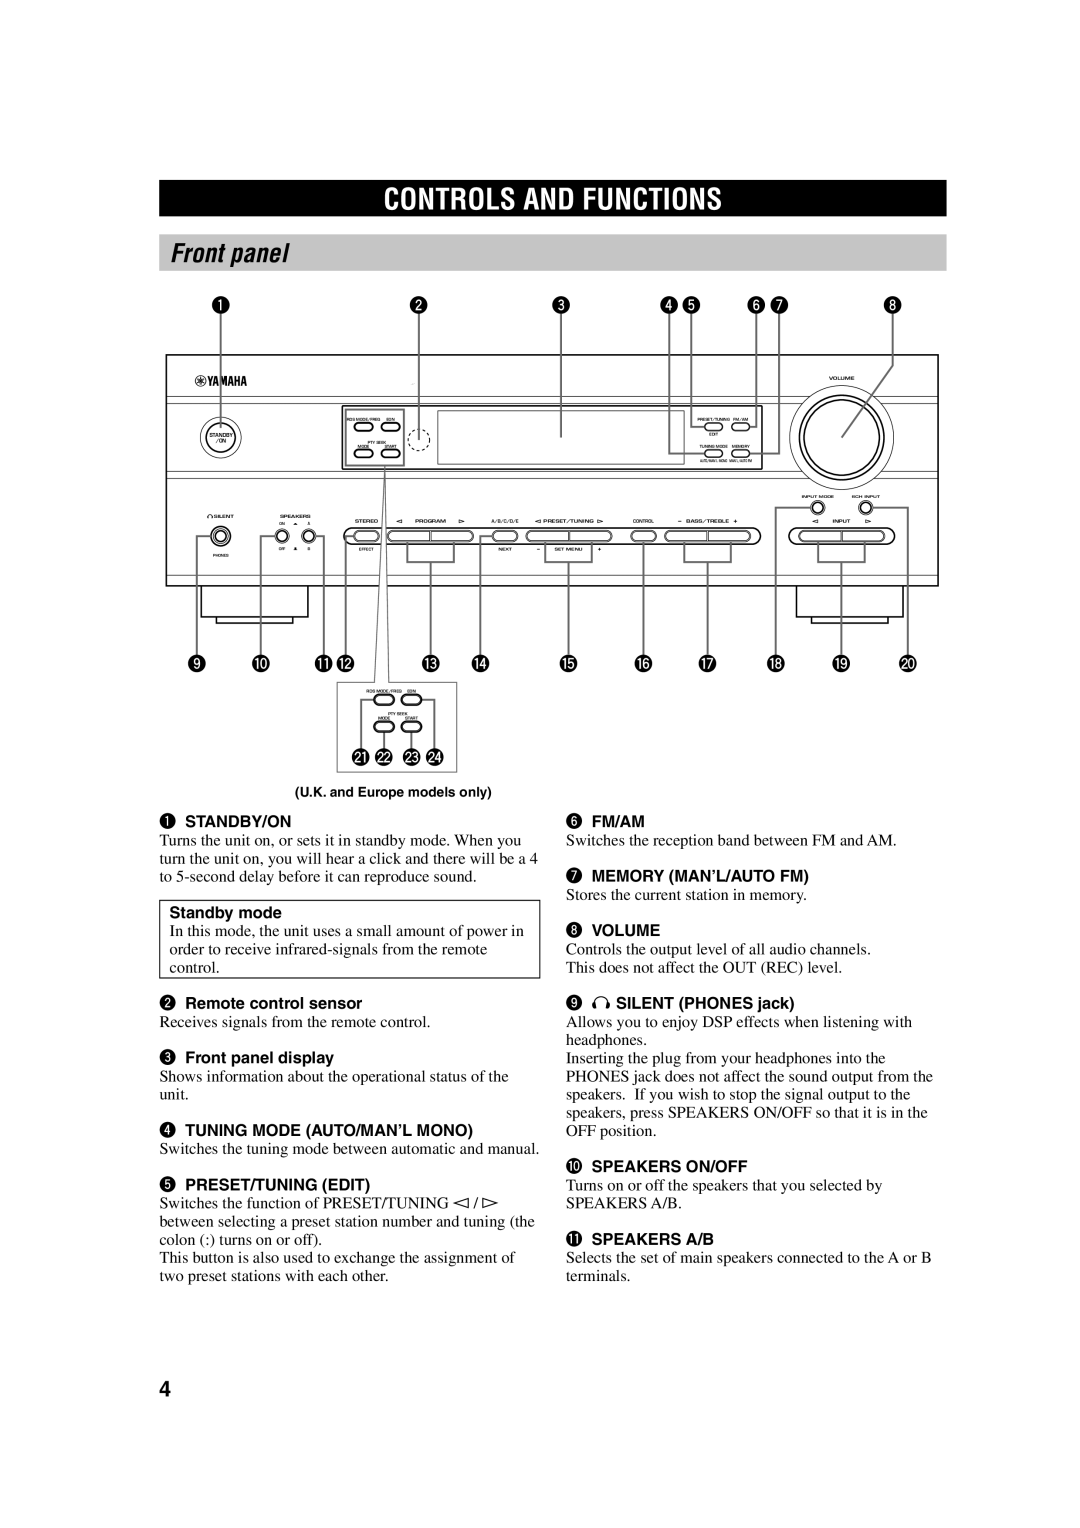 Yamaha HTR-5630RDS Controls And Functions, Front panel, 9 0 qw, y u i o p, a s d f, Standby/On, Standby mode, 6 FM/AM 